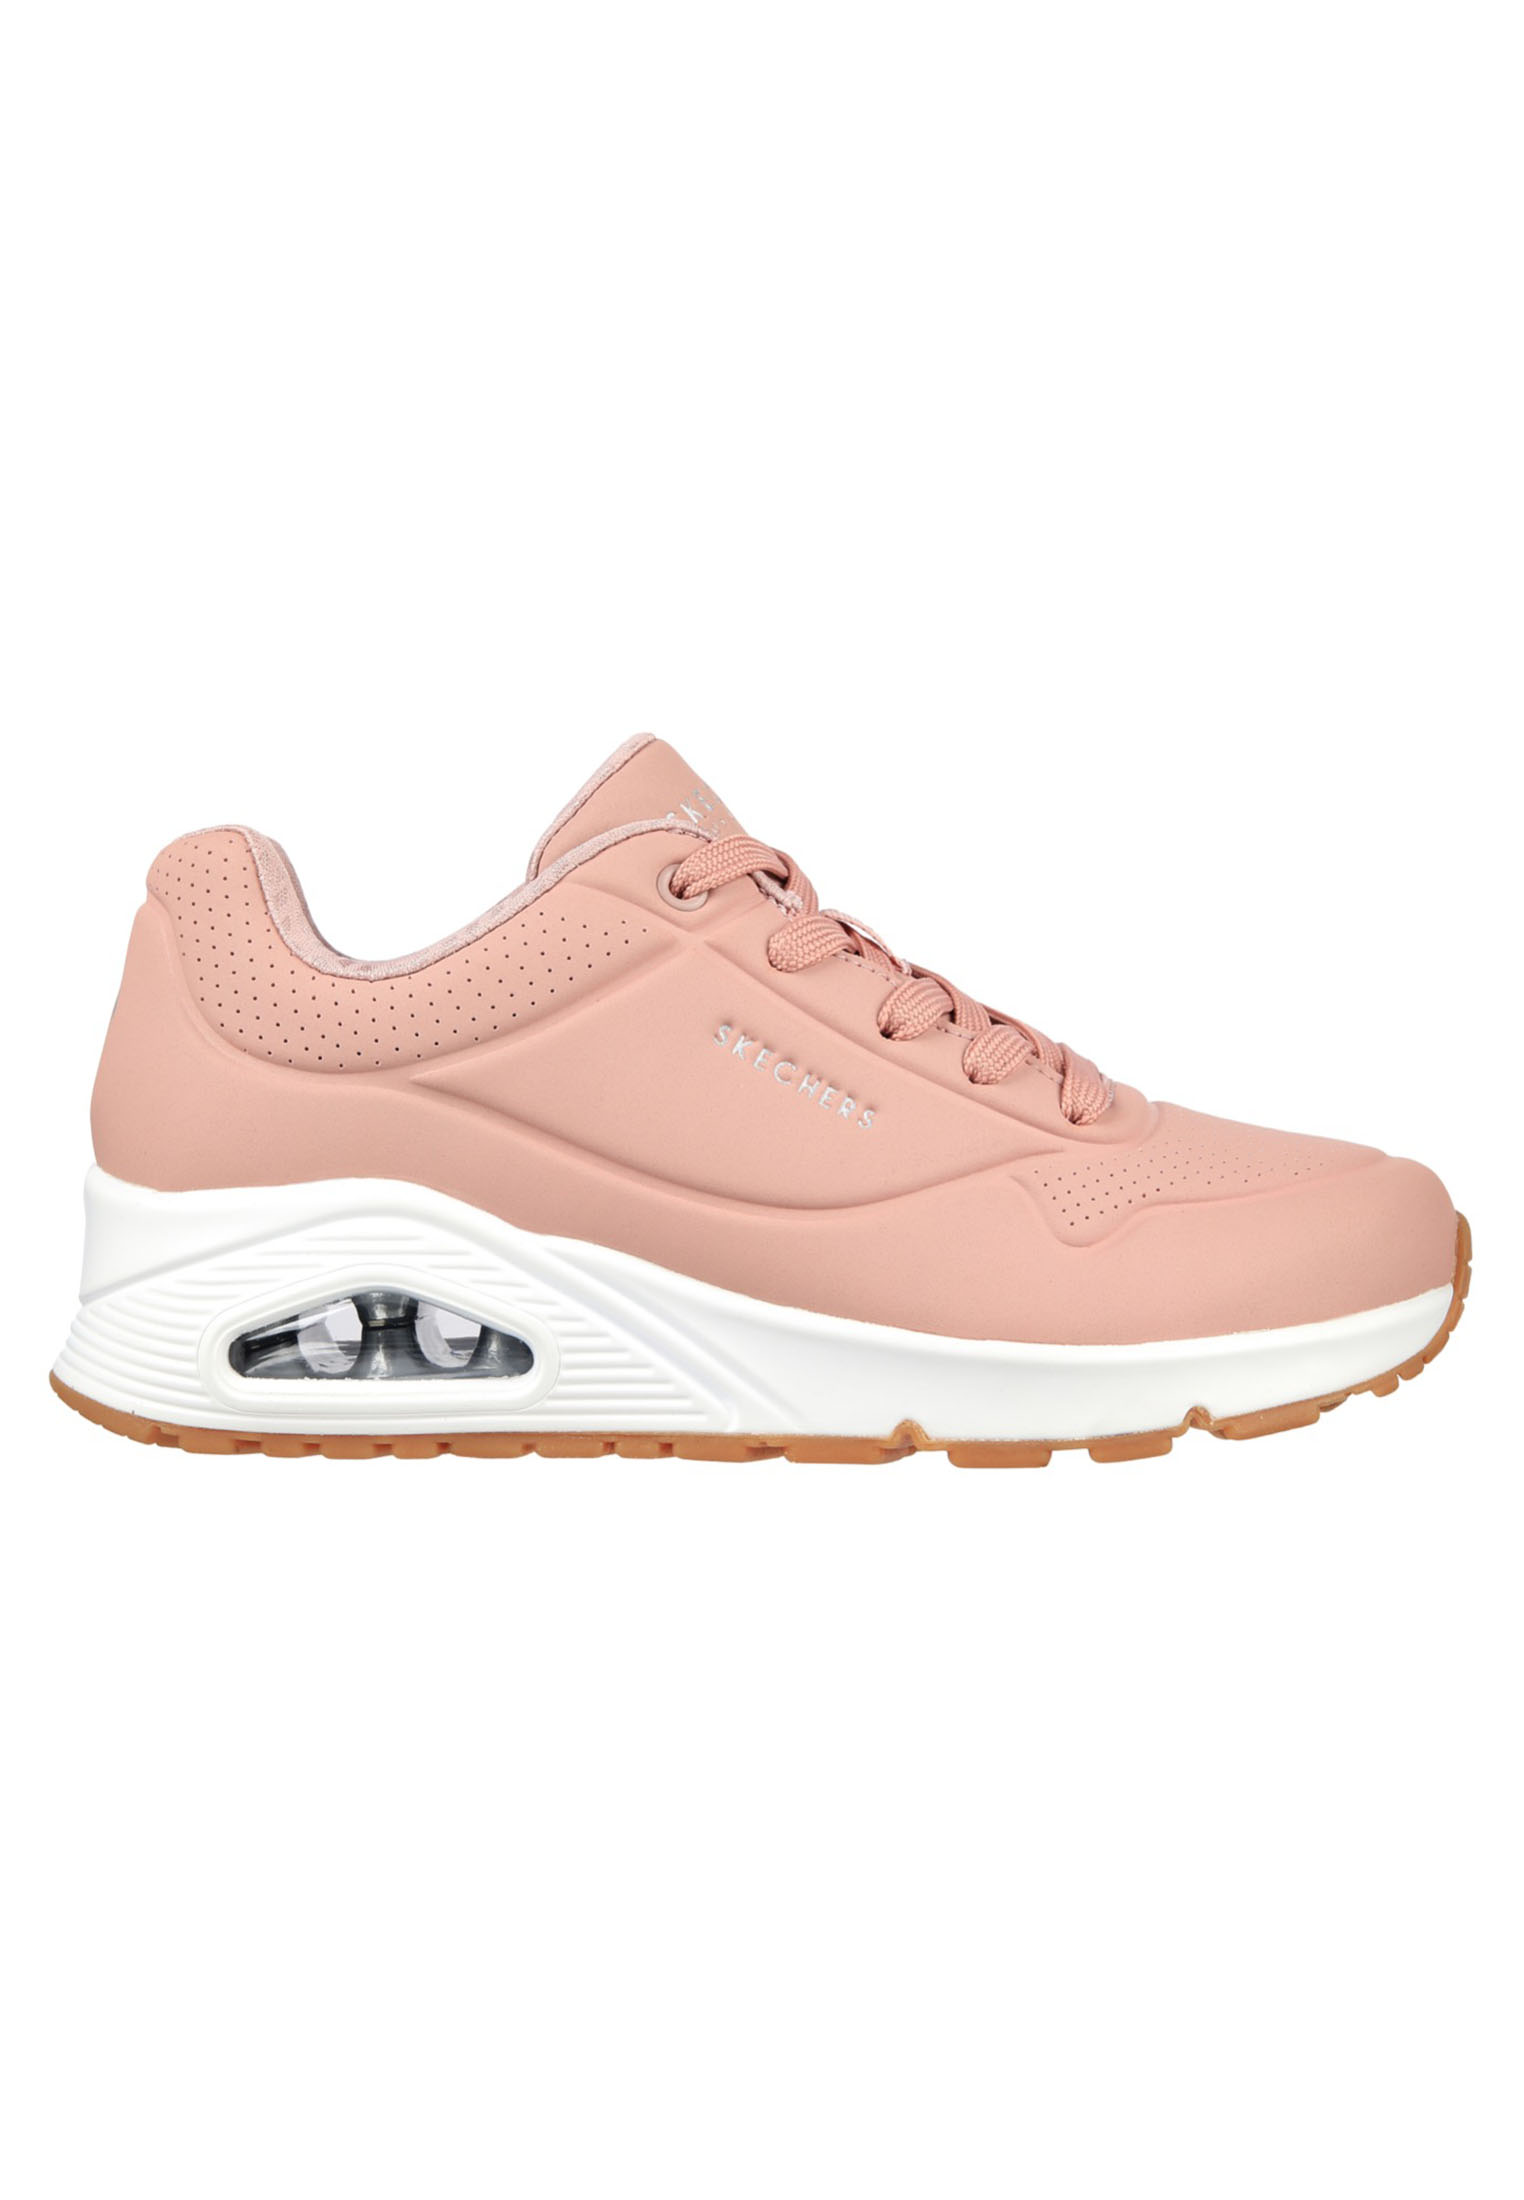 Skechers Uno Stand On Air 73690/BLSH Roze-37 maat 37